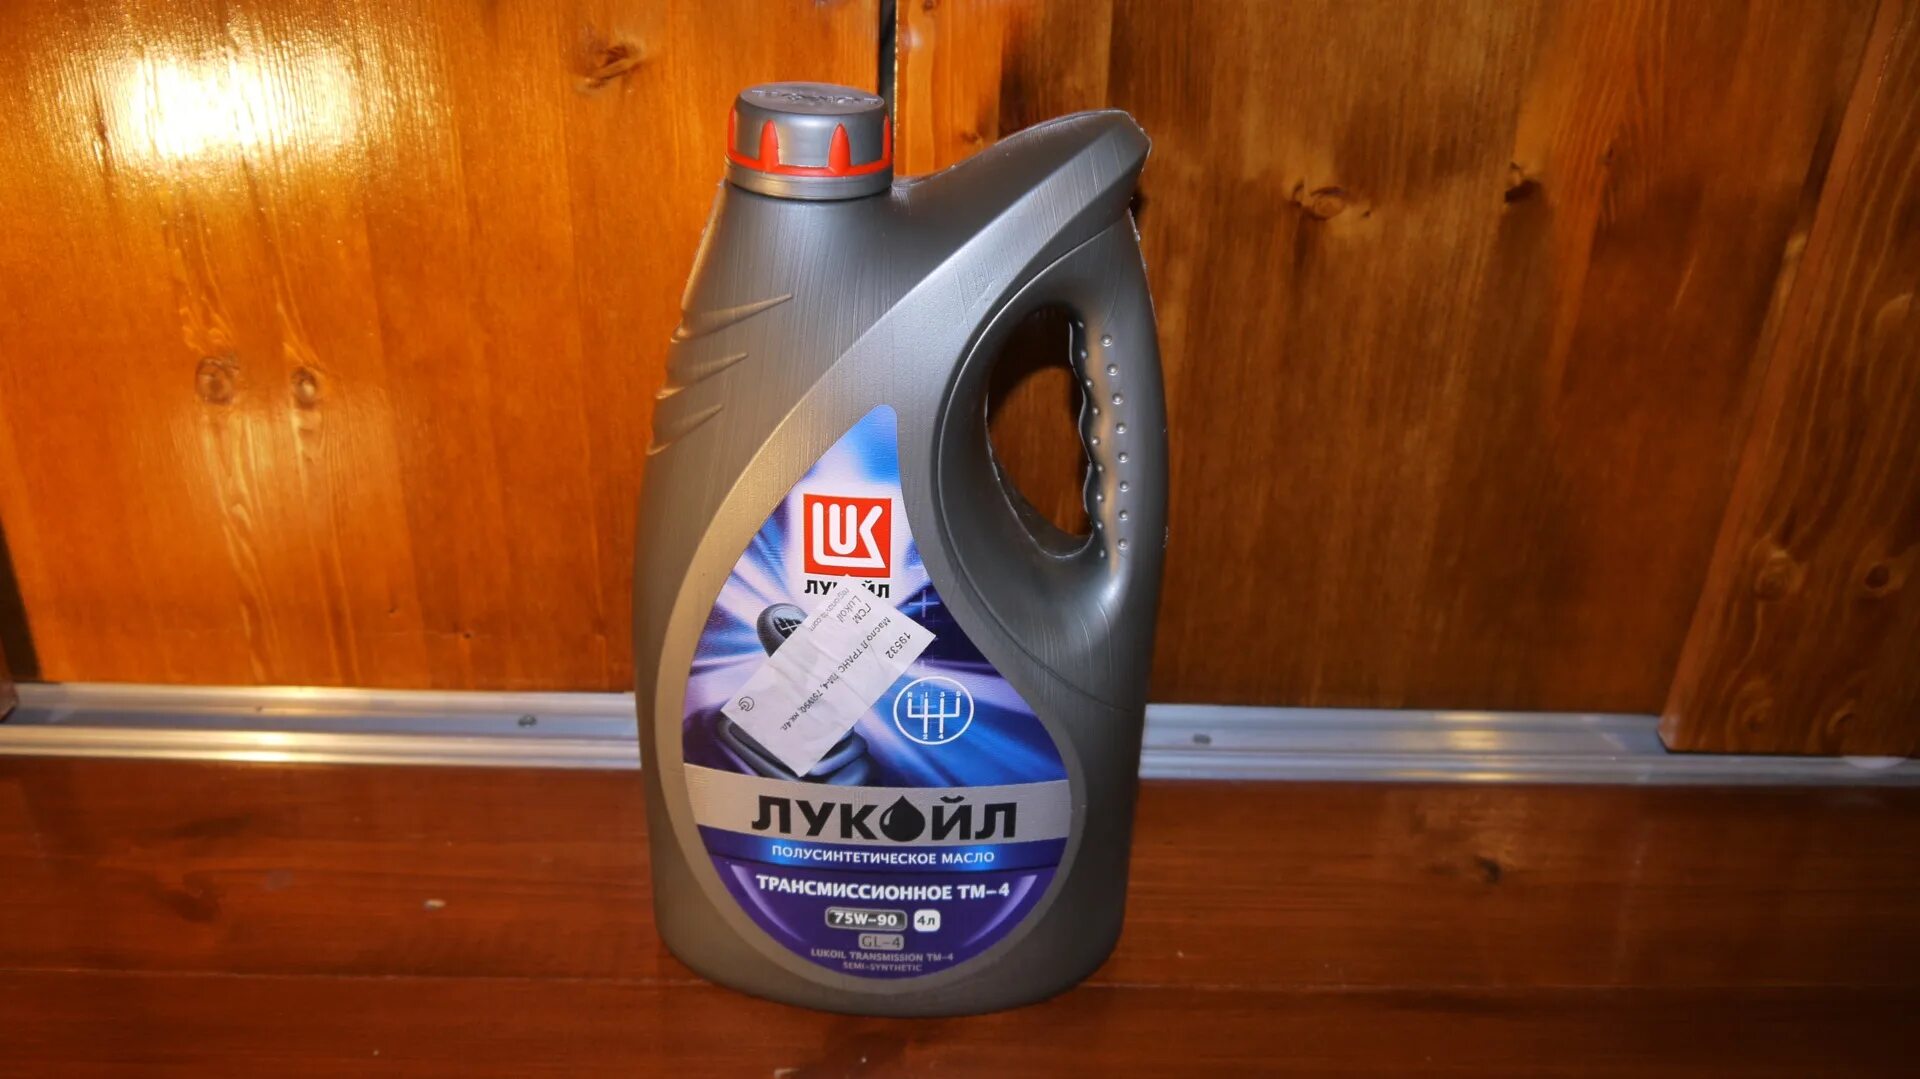 Масло Лукойл 75w90. Лукойл ТМ-4 75w-90 фф3. Лукойл ТМ 4. Lukoil 75w90 20л.